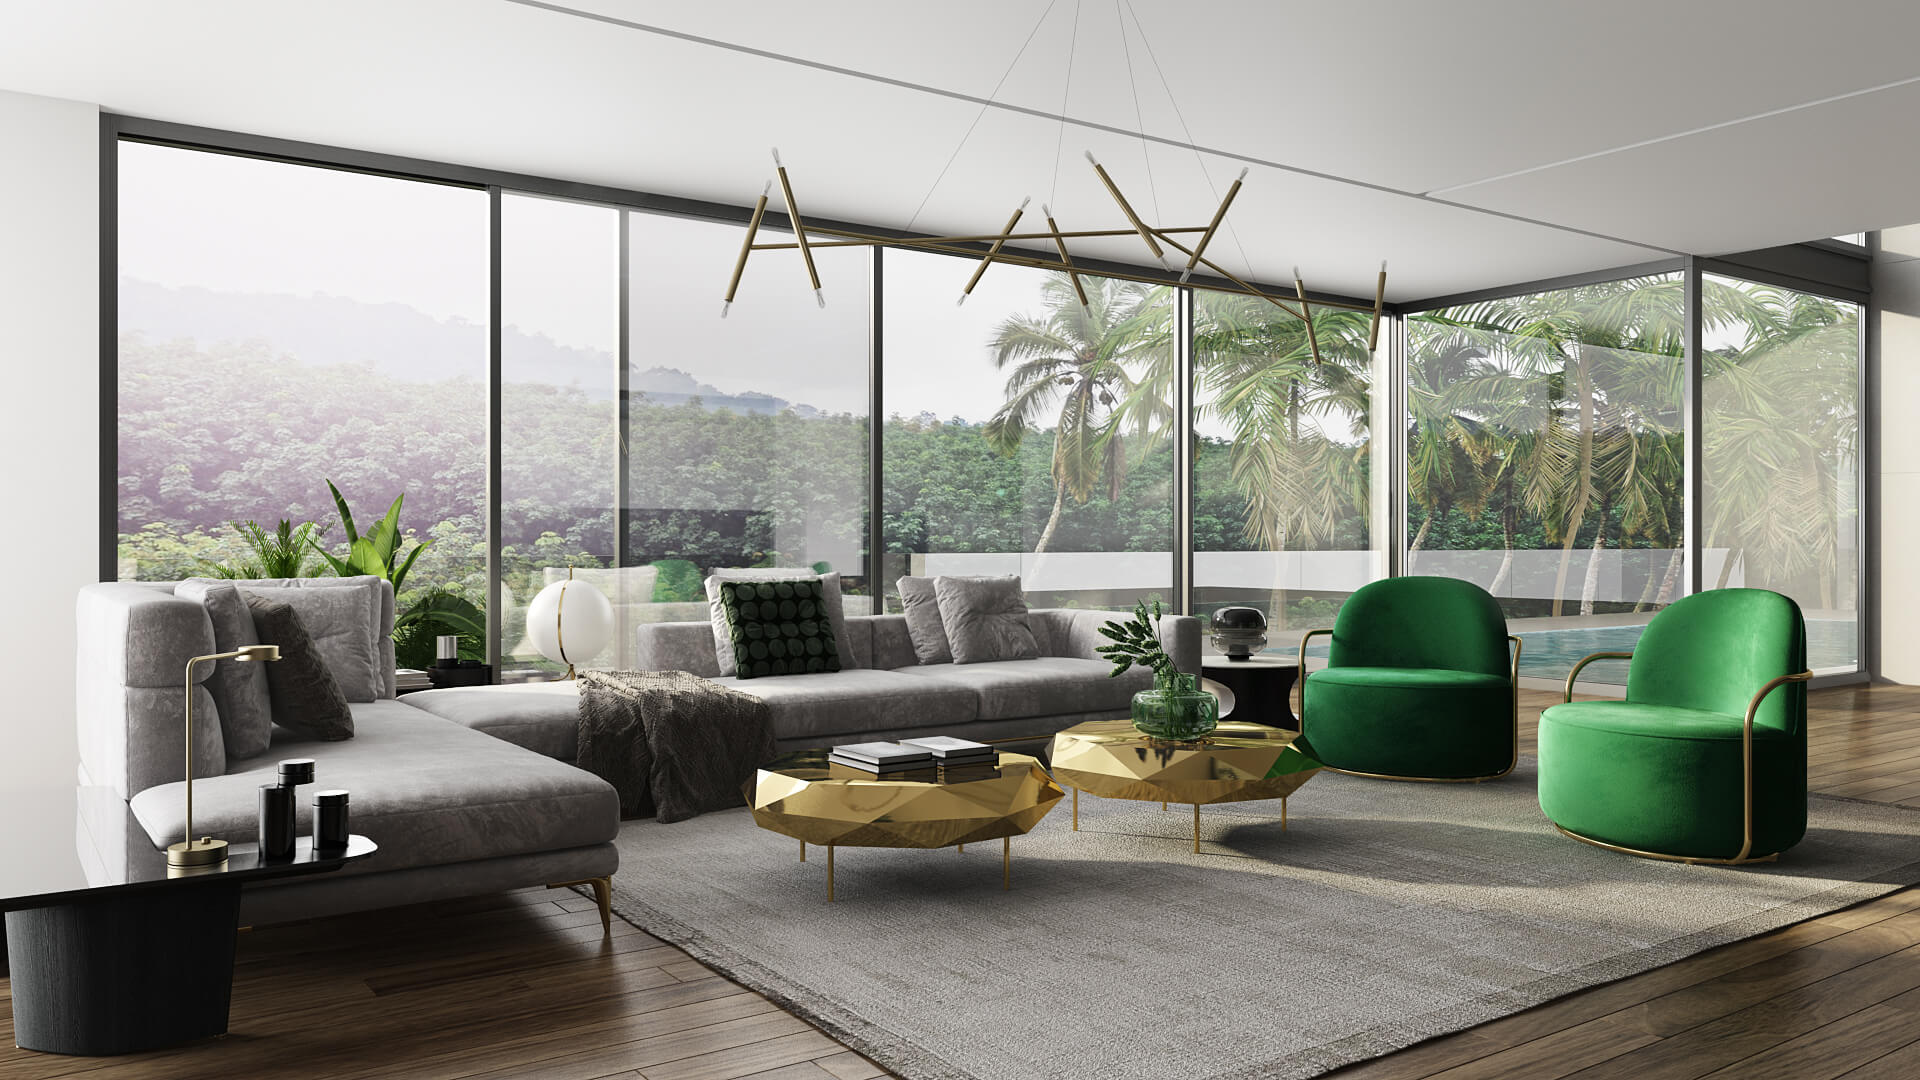 3D Interior Visualization of a Living Room in a Tropical House